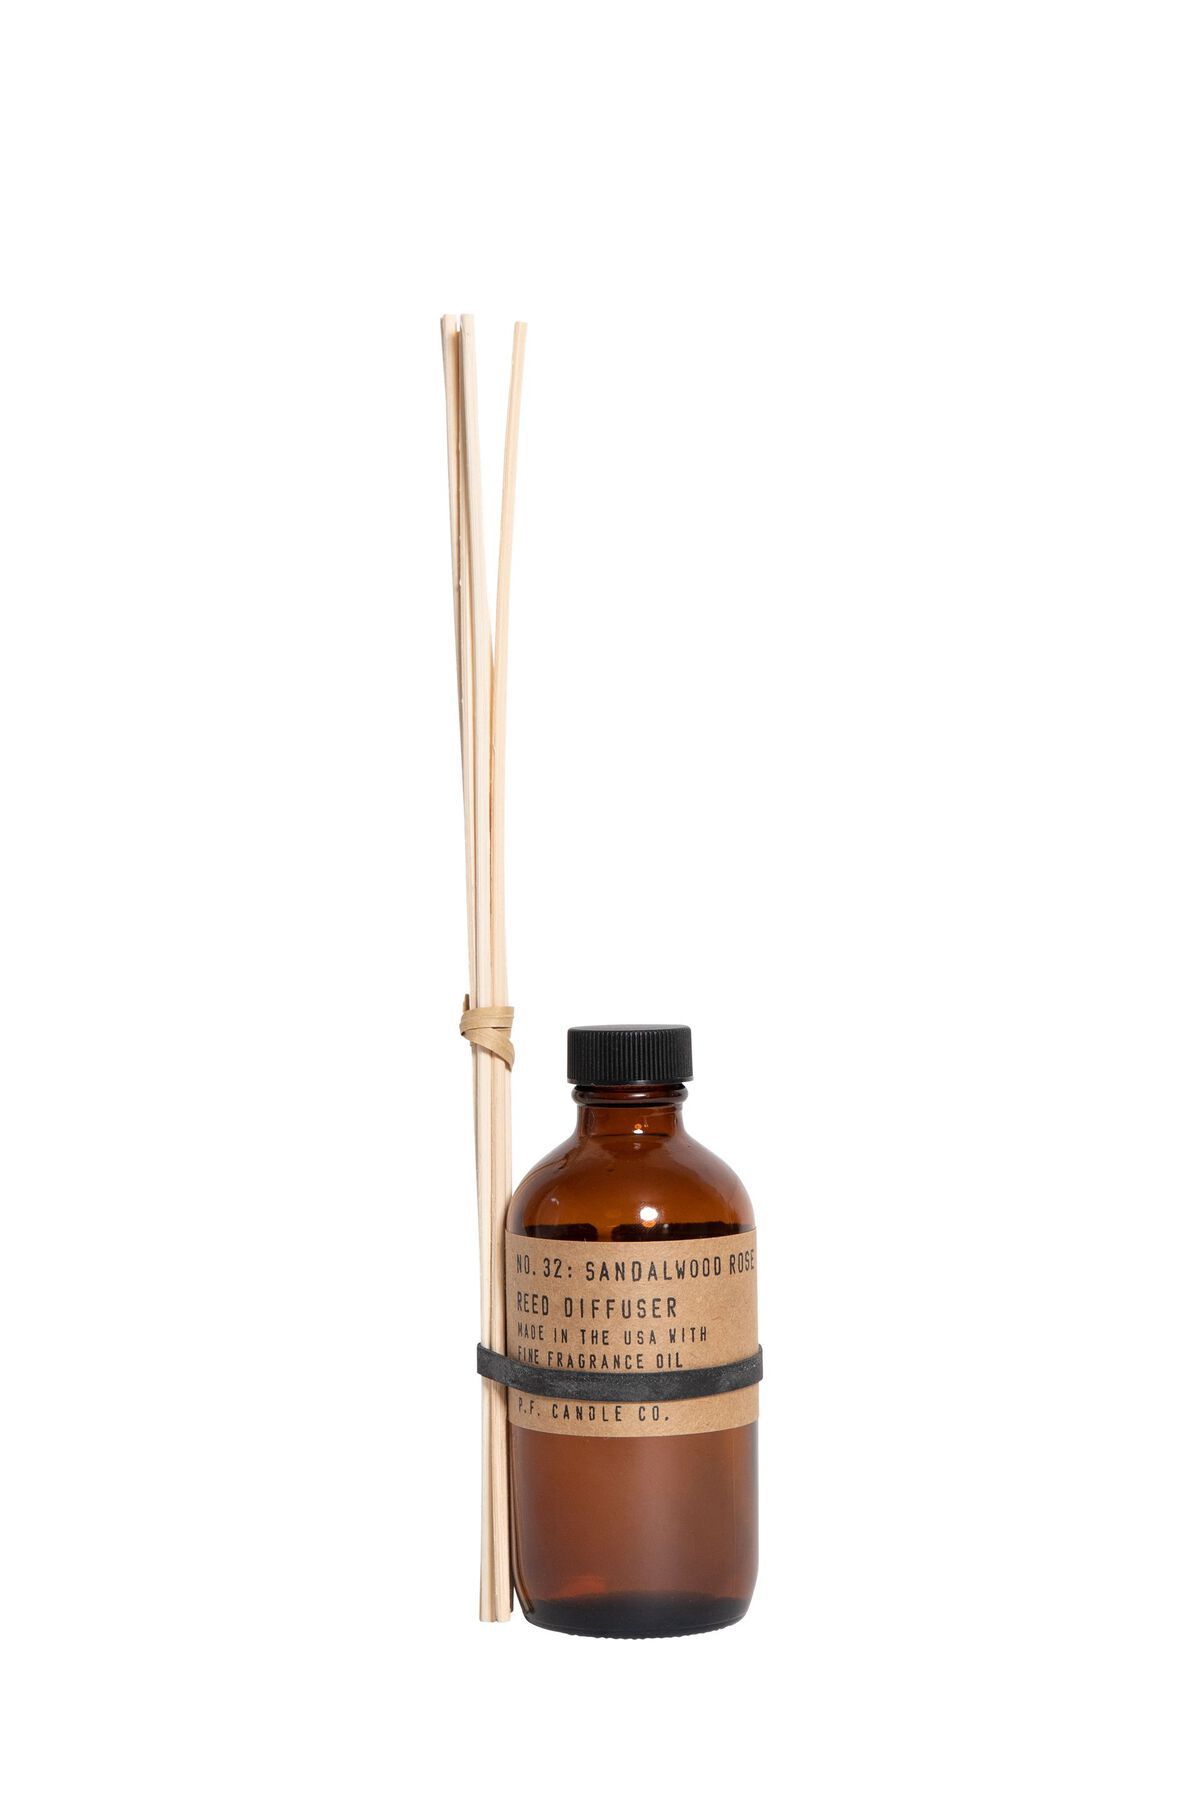 Dynamite P.F. CANDLE CO | Reed Diffuser. 2